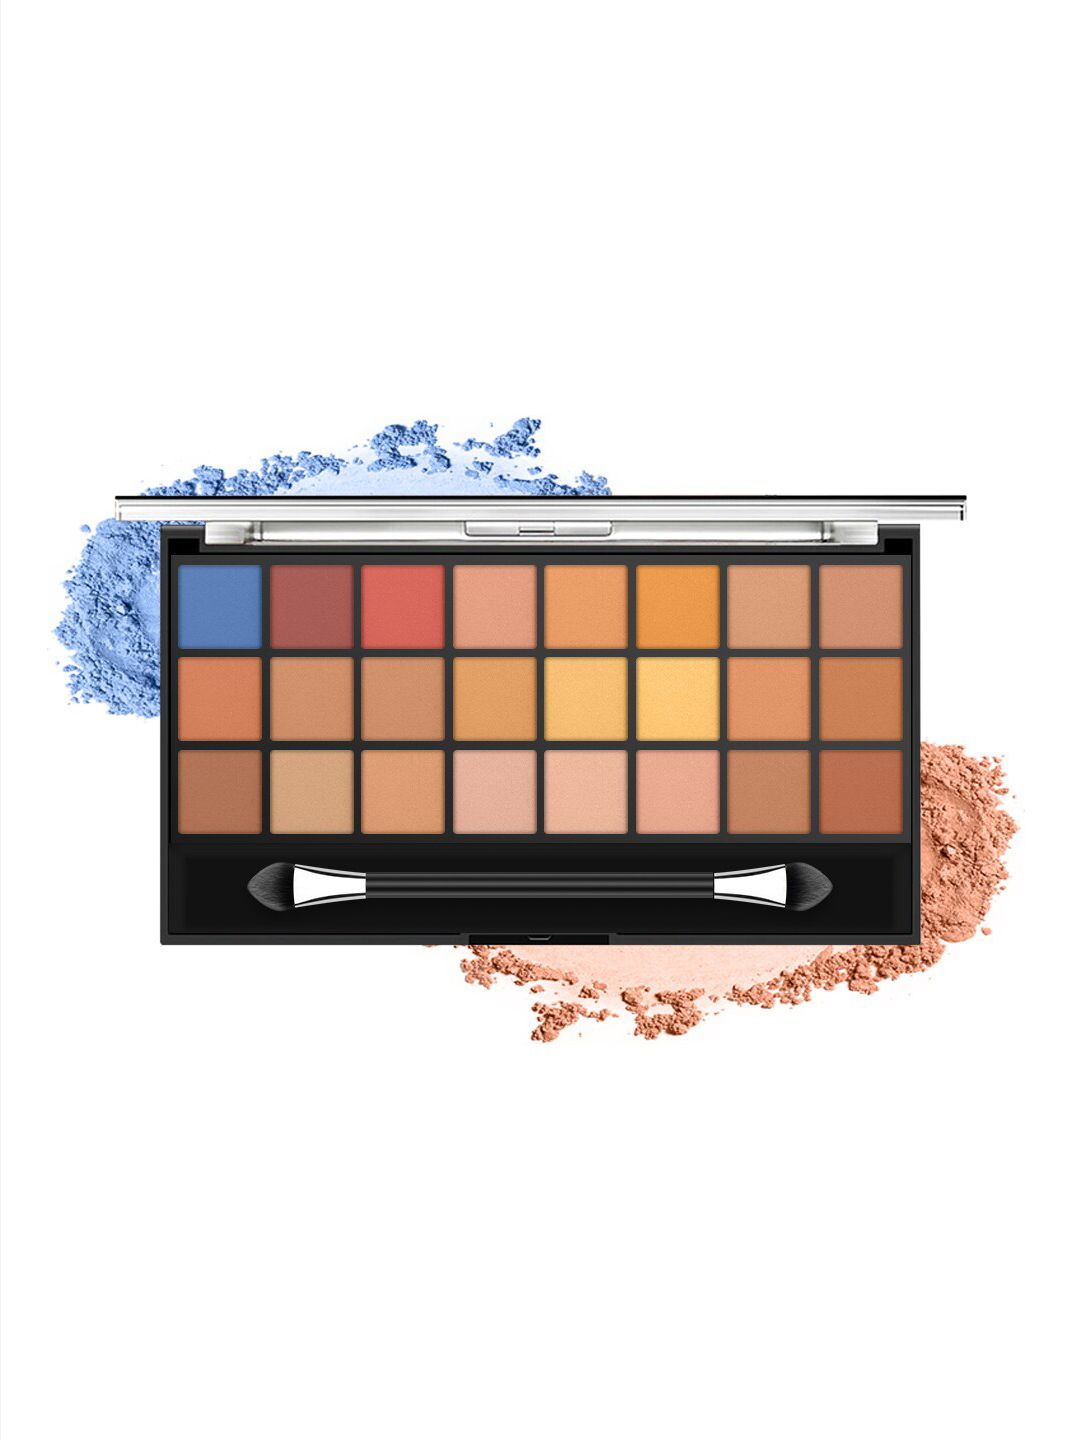 MISS ROSE 24 Color Matte Eyeshadow Palette 7001-071 NY02 Price in India